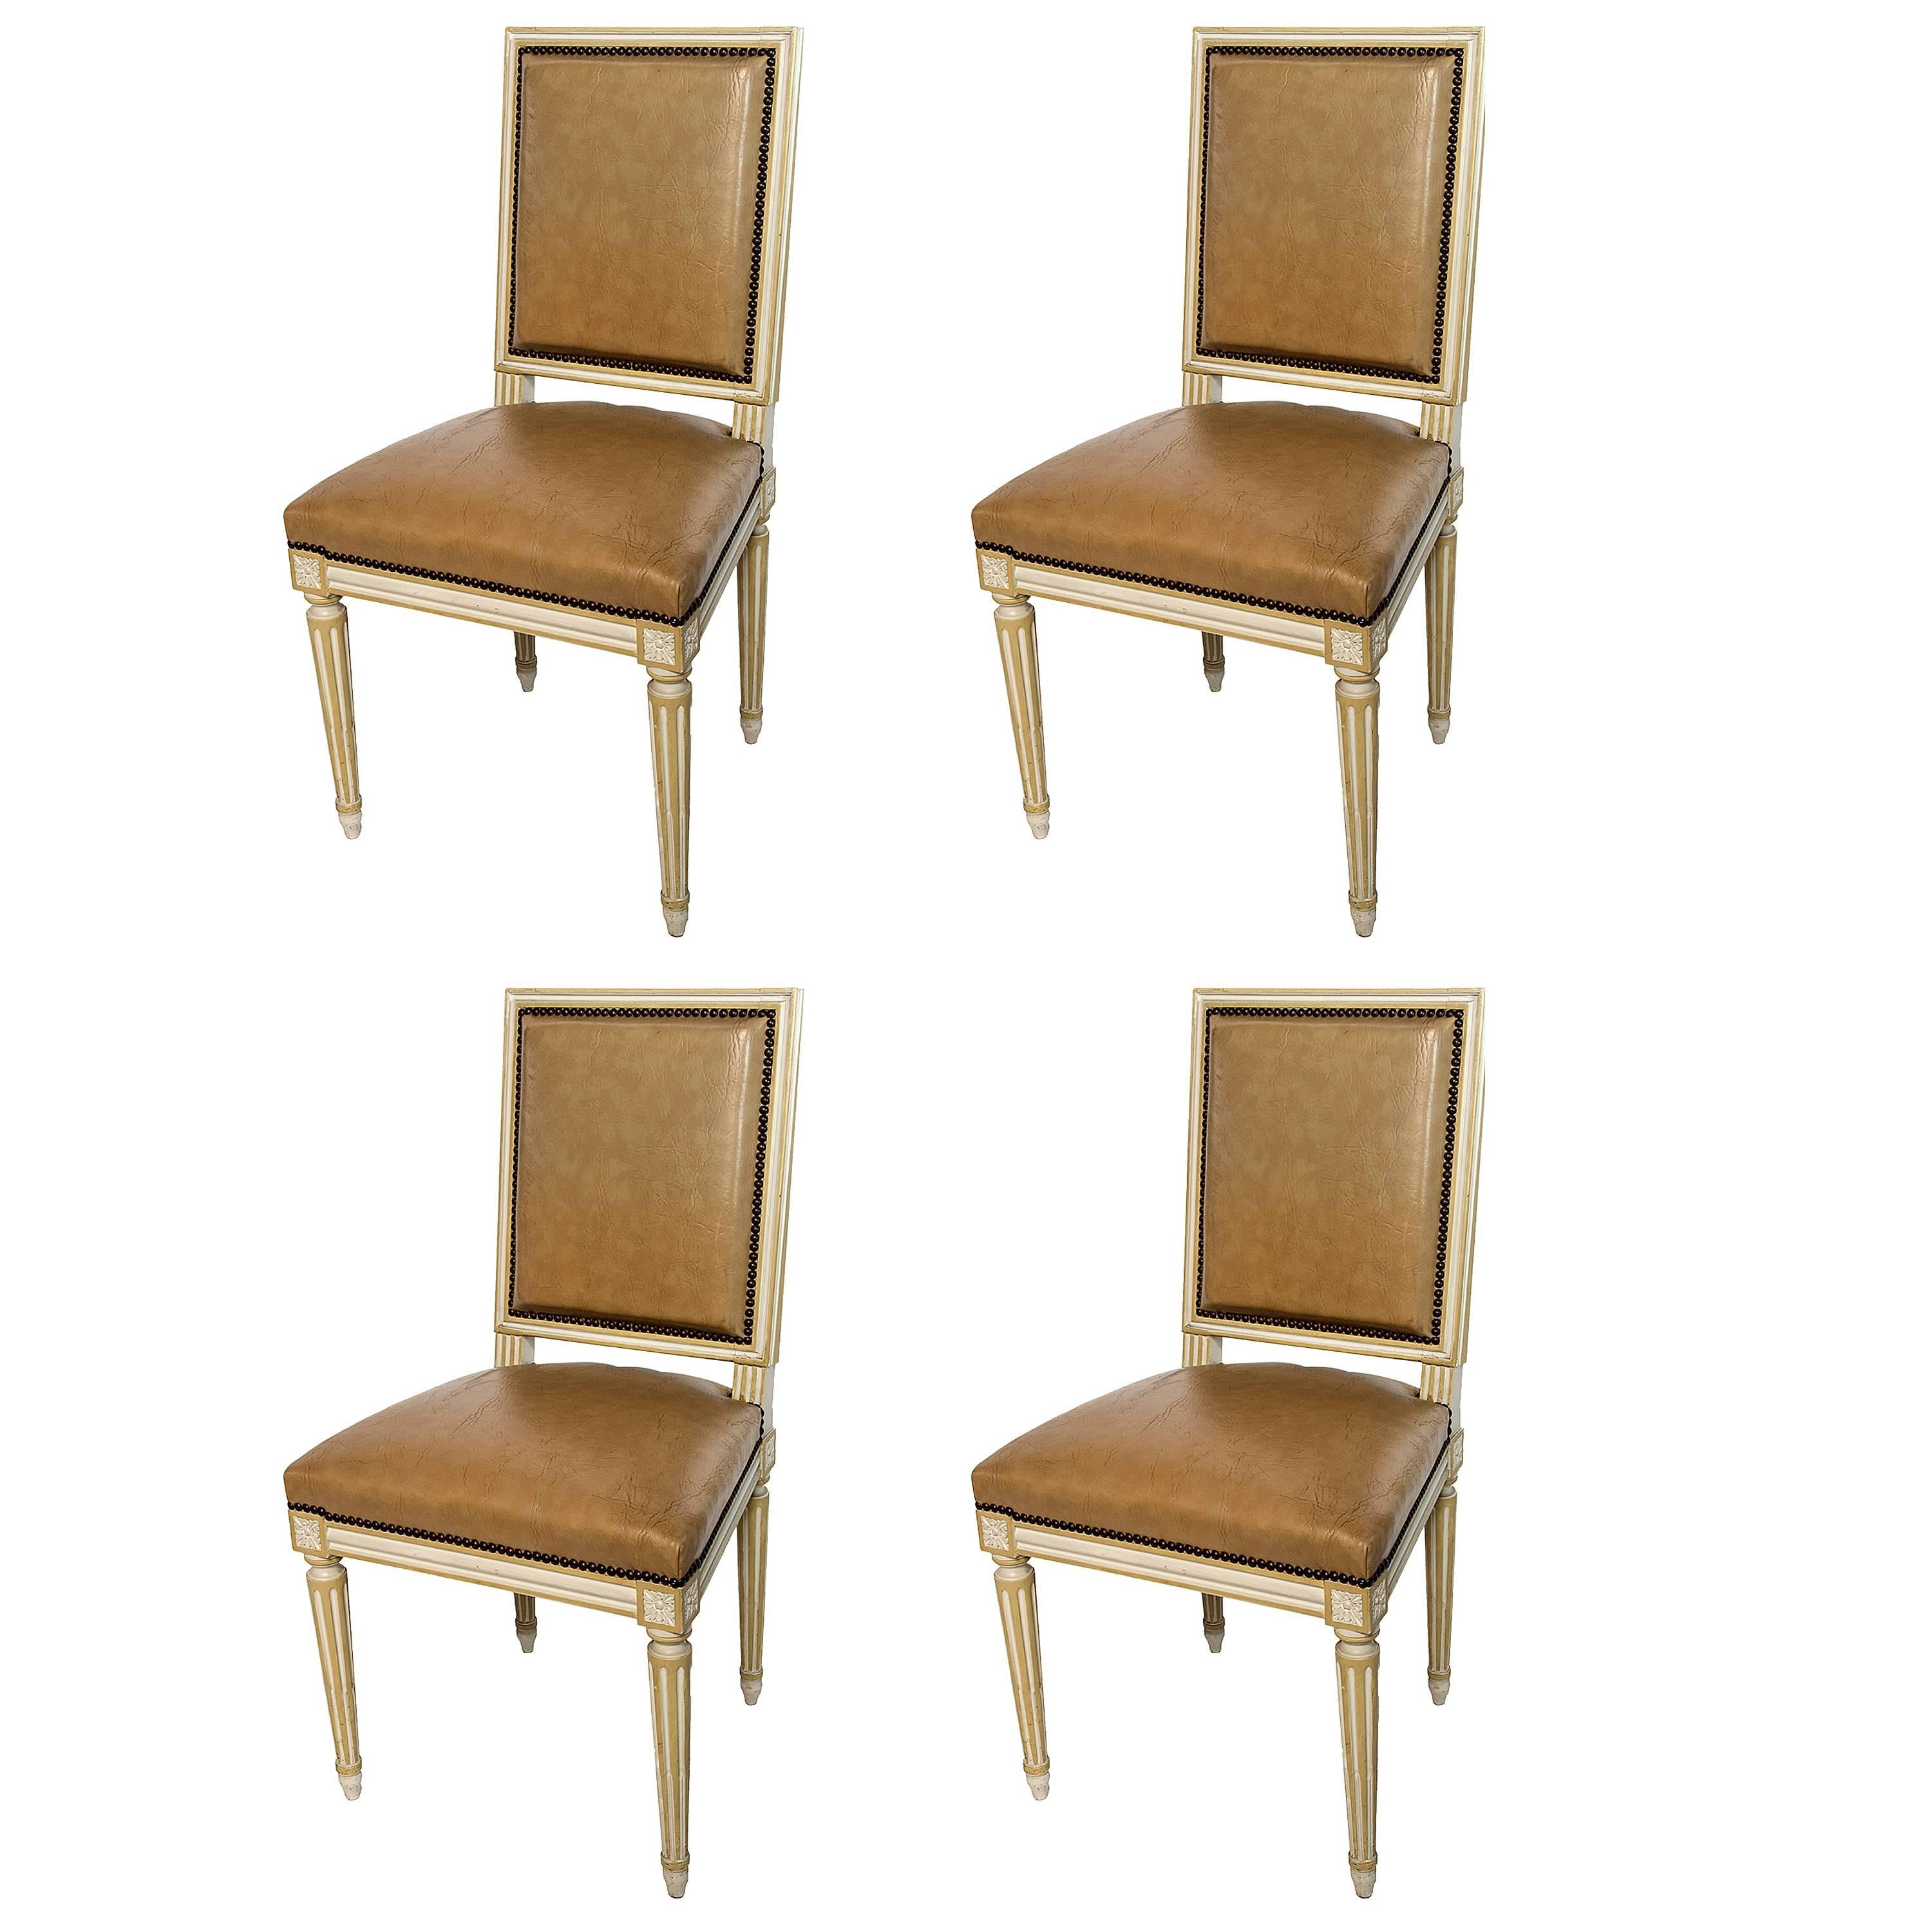 Set of Four Square Back Louis XVI Dining Chairs Covered in a Tan Leather